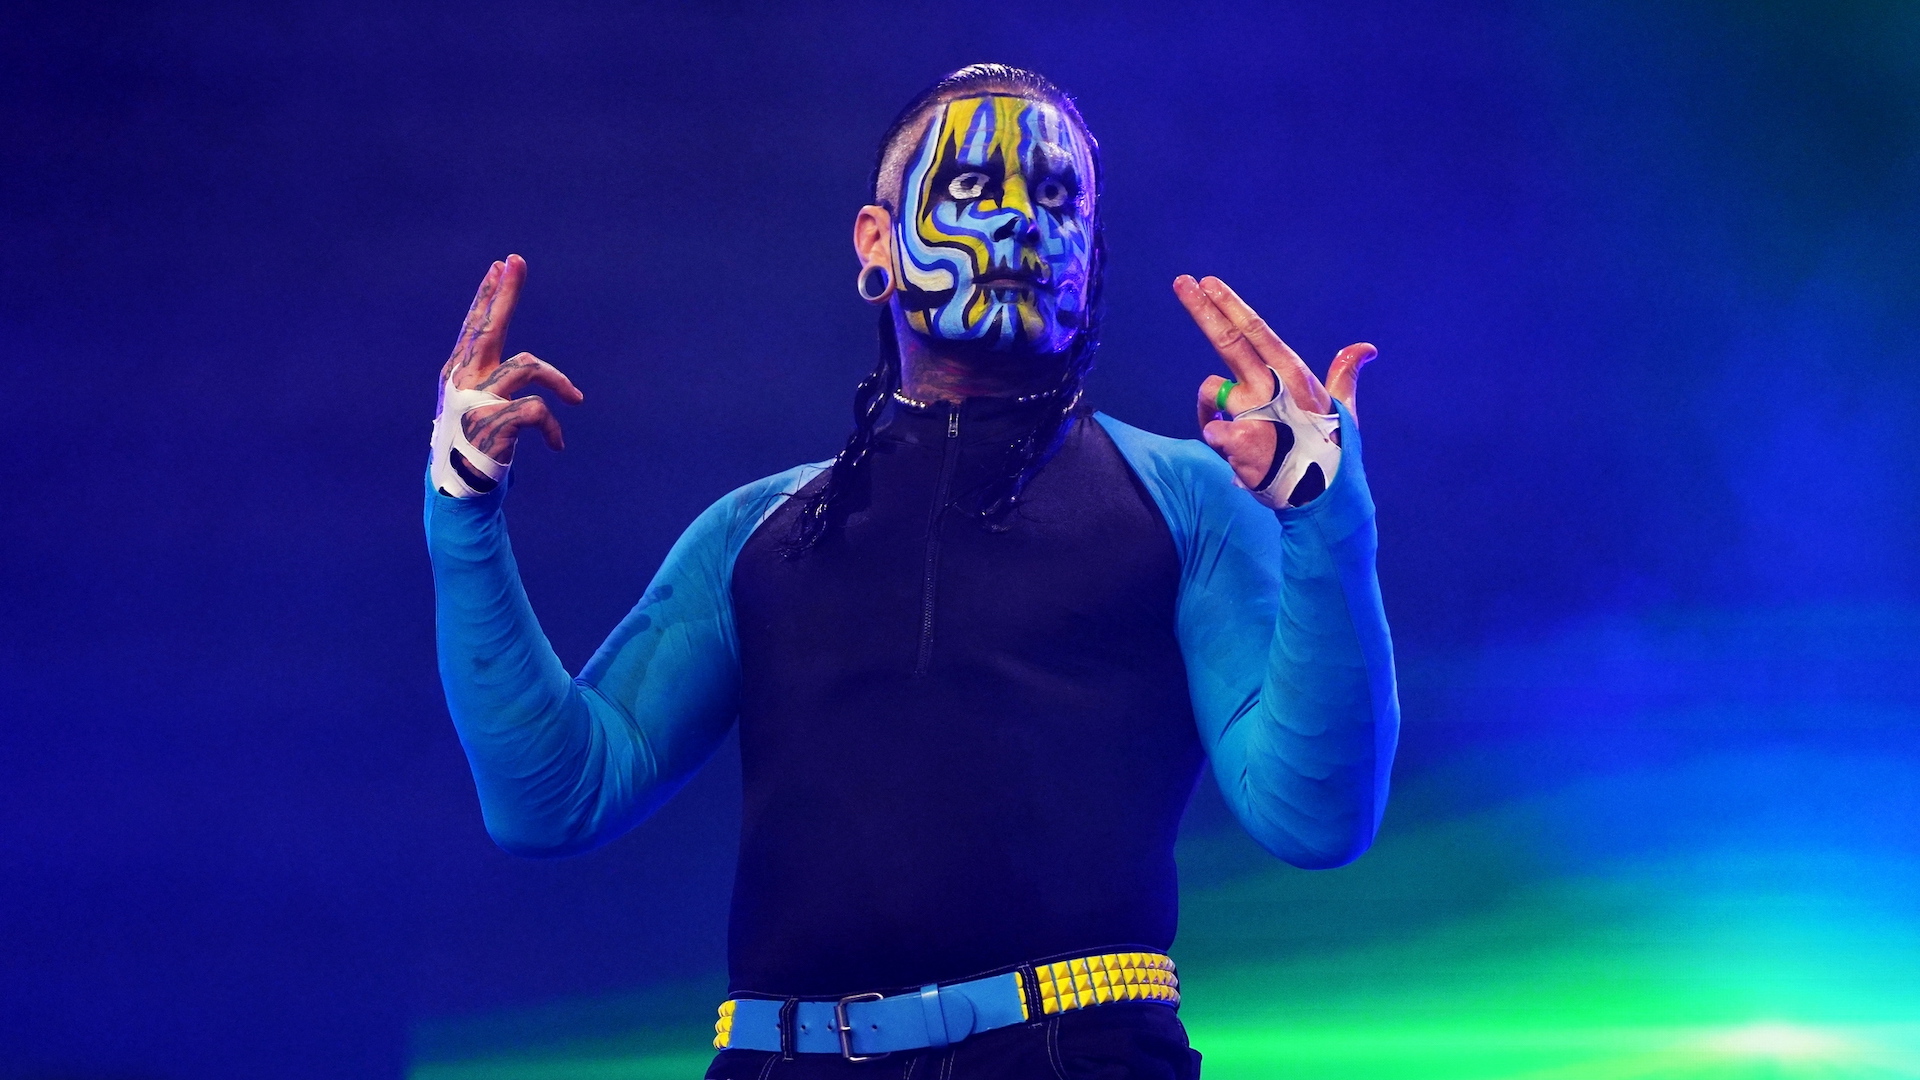 REPORT: Jeff Hardy Suffered Broken Nose During Match Against Sammy Guevara on 2/16 AEW Rampage